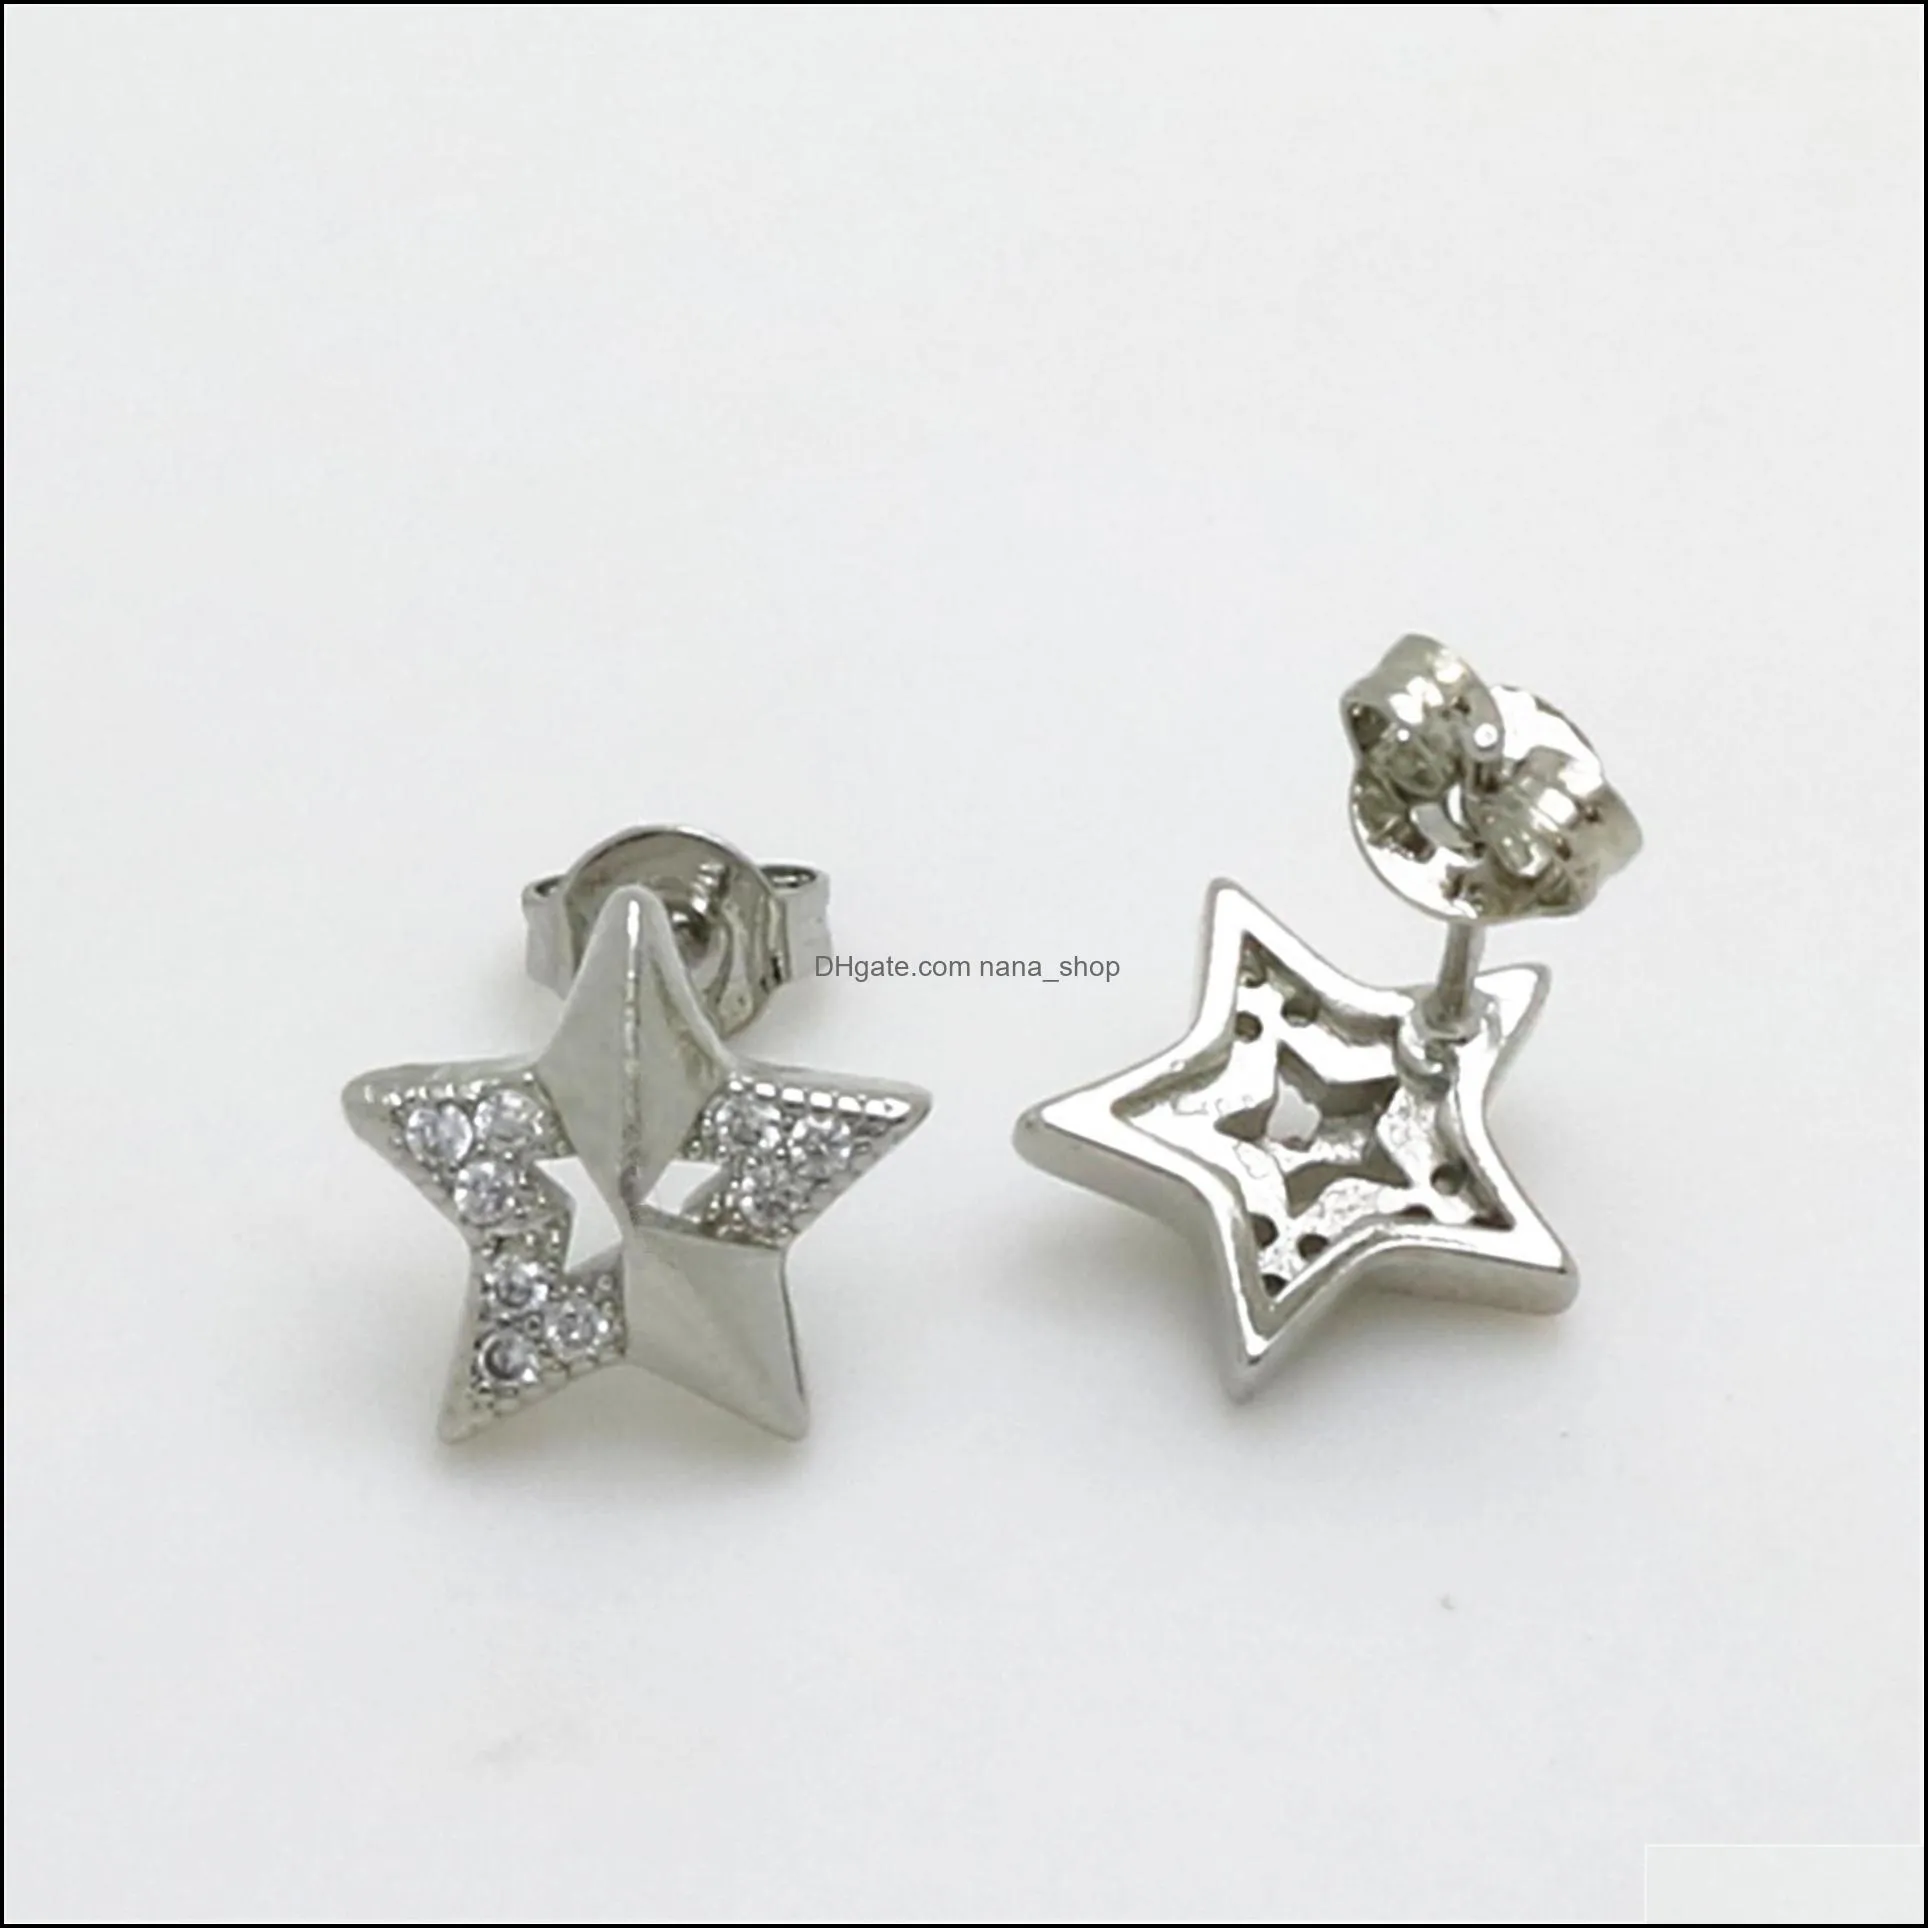 silver earrings micro inlaid crystal fivepointed star stud earrings women small cute banquet luxury wedding jewelry